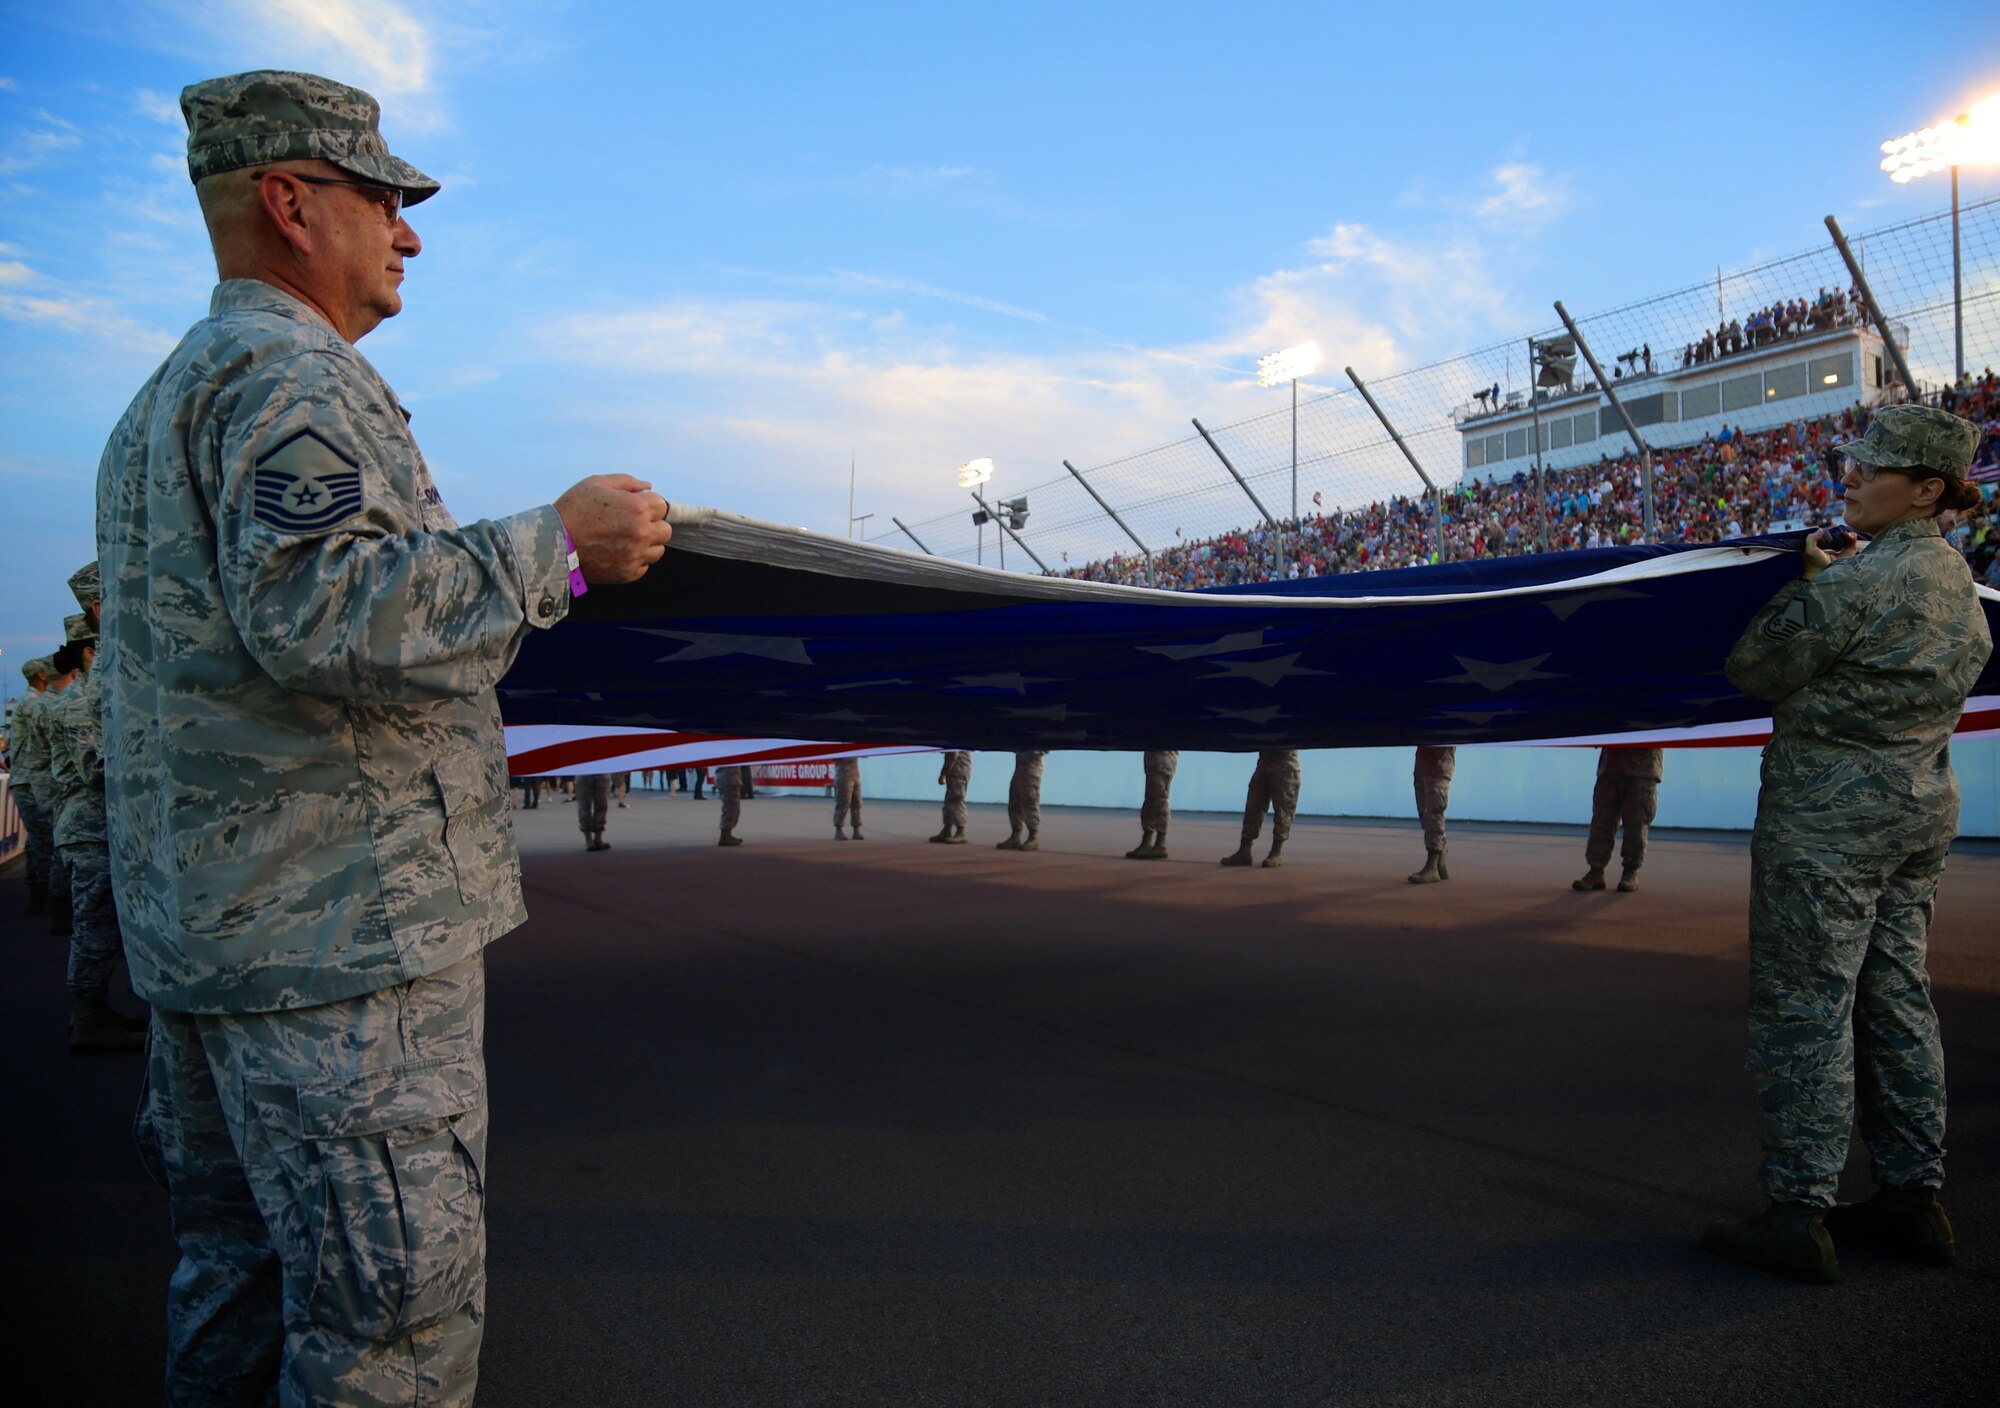 Master Sgt. Gerald Sonnenberg and Master Sgt. Karen Ridge prepare the American flag for the national anthem in front of a packed Indycar crowd August 25, 2018.  As part of the event, 932nd Airlift Wing Maintenance Group commander, Col. Sharon Johnson, was recognized on stage with the Indy drivers at the Bommarito Automotive Group 500.  The race was held at Gateway Motorsports Park, Madison, Illinois. Johnson was an honored VIP to help kick off the 2nd annual IndyCar race which was won by Will Power,  won the 248-lap race around the four-turn, 1.25-mile Gateway Motorsports Park paved track in Madison, Illinois, in his #12 Chevrolet by 1.3 seconds over second place finisher Alexander Rossi.  The 932nd Airlift Wing was represented by maintenance, medical, public affairs staff and operations personnel.  (U.S. Air Force photo by Lt. Col. Stan Paregien)